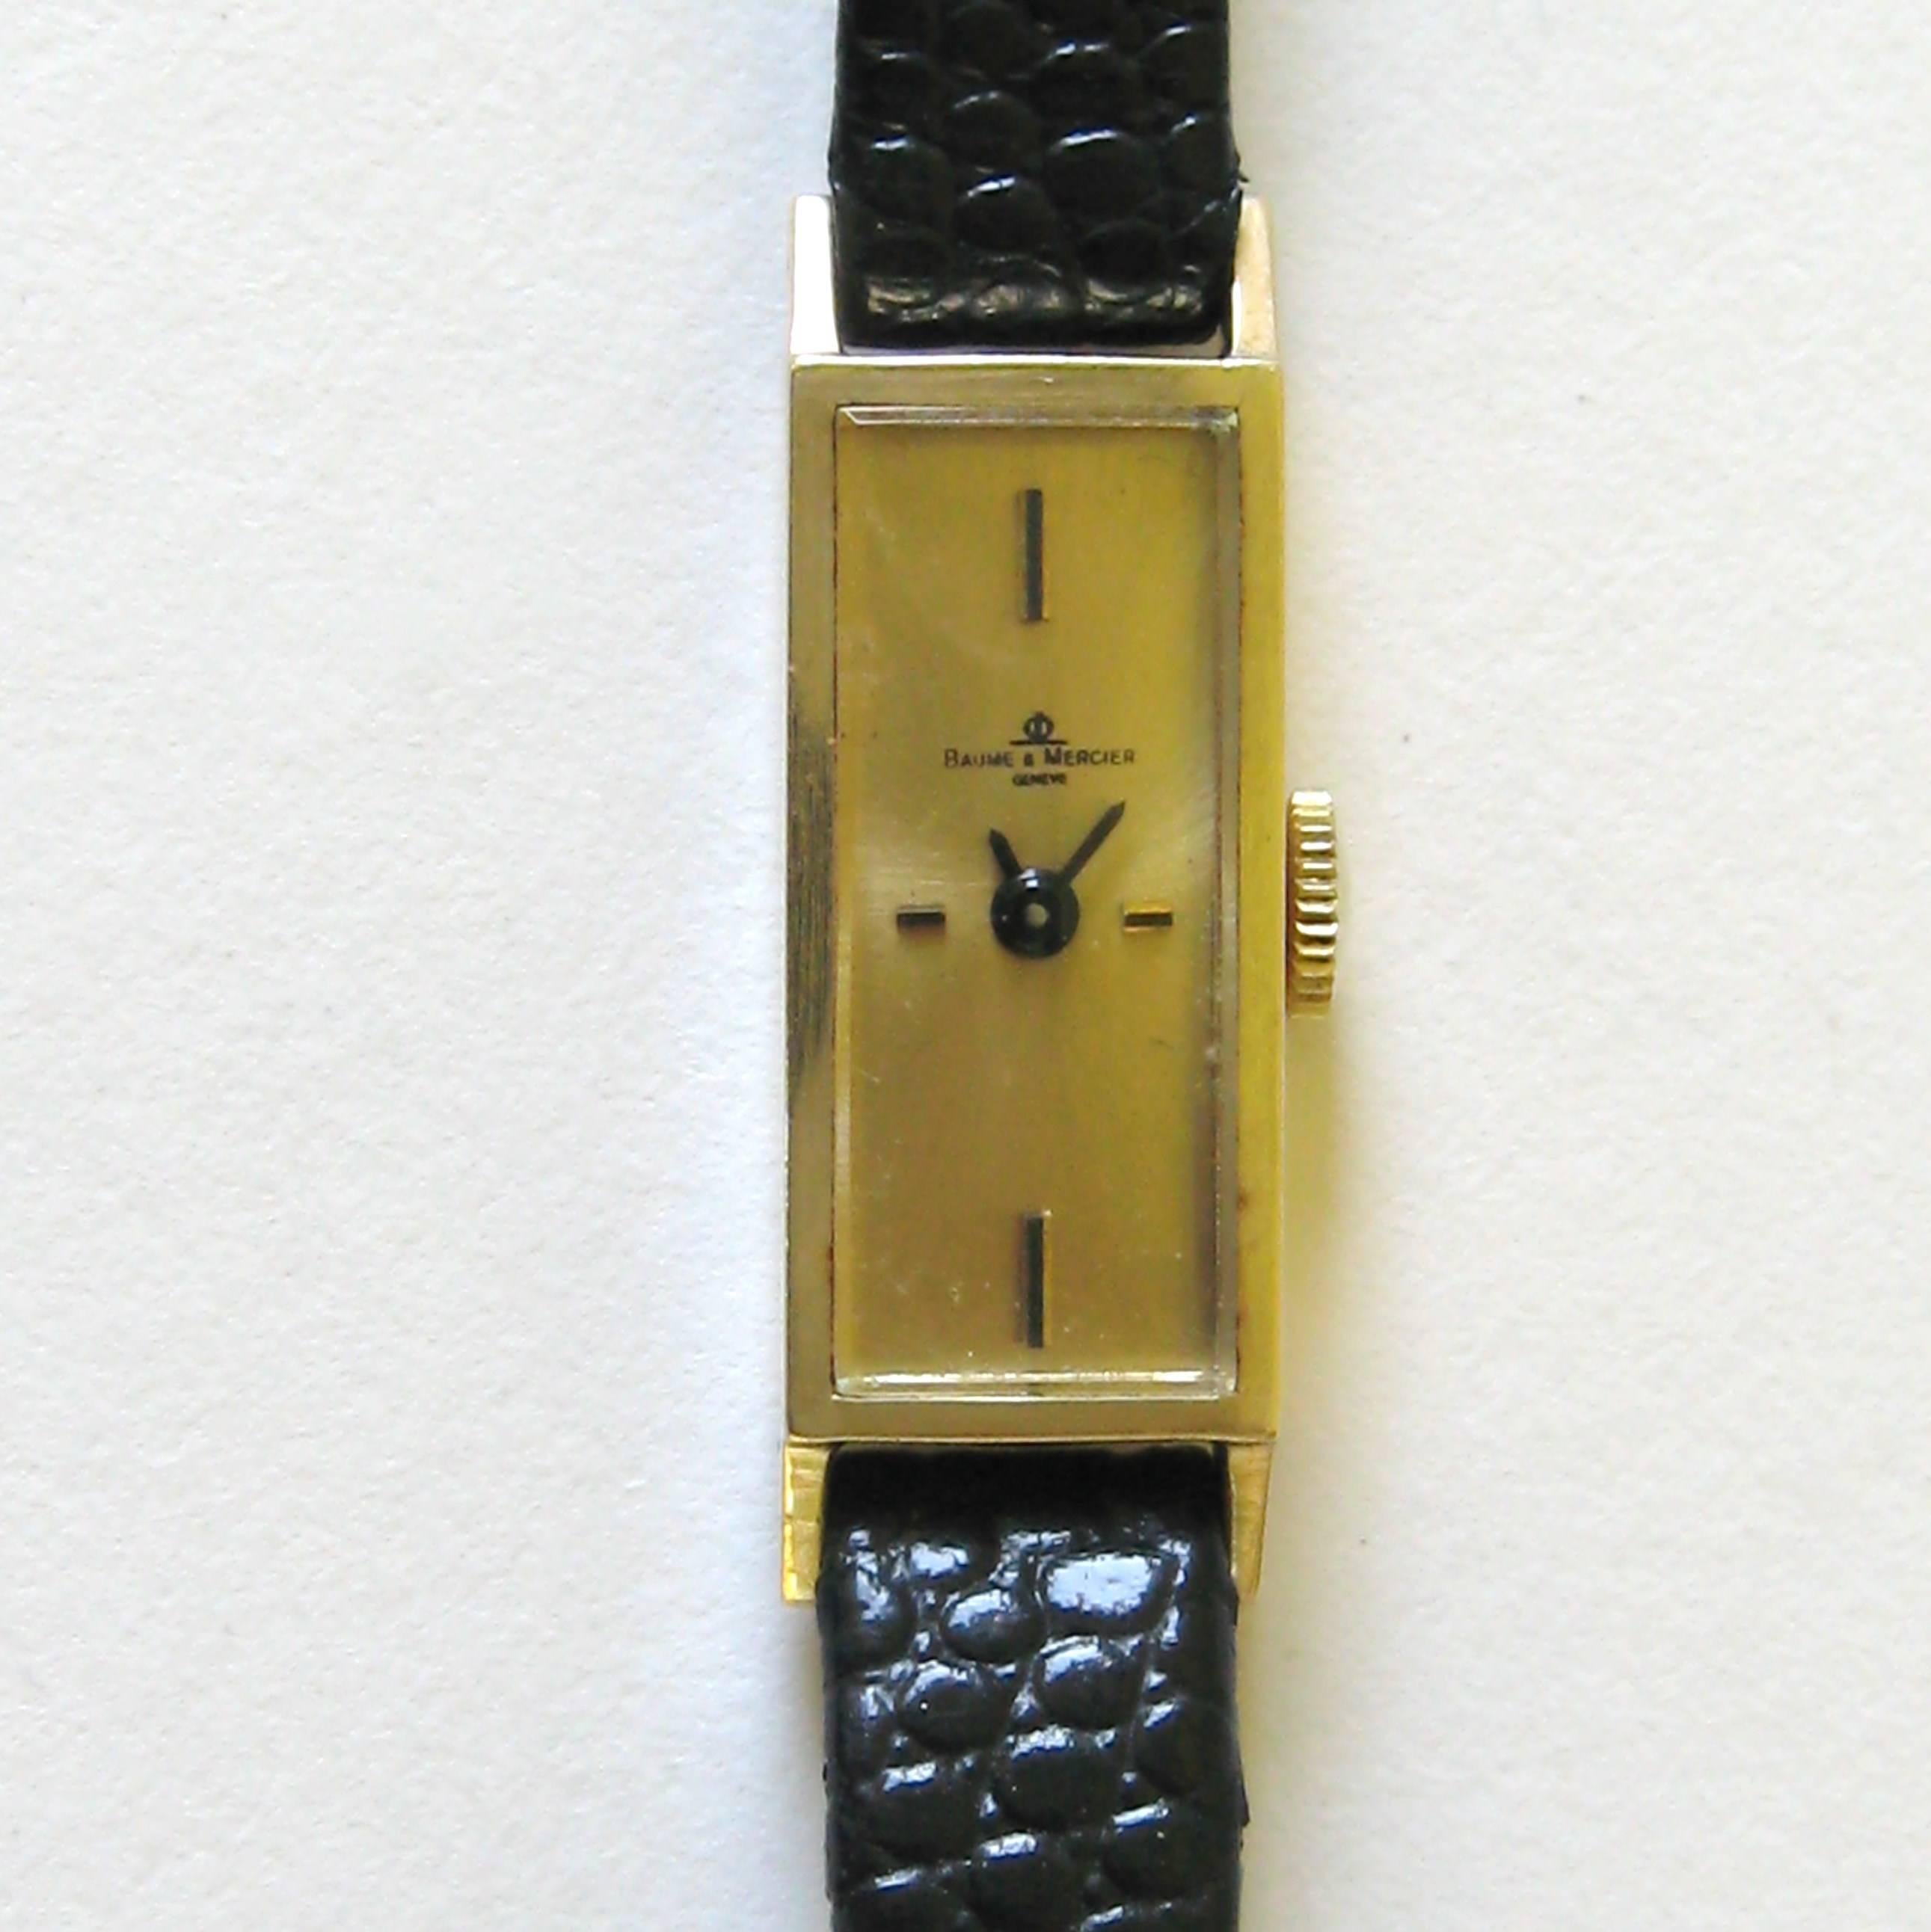 Classic 14k gold wristwatch from renowned watch company Baume & Mercier. Sleek, long rectangular face, four baton hour marks at 12, 3, 6 and 9 with a brushed gilt dial. 17 Jewel manual-wind movement, engraved inscription on the back, case number